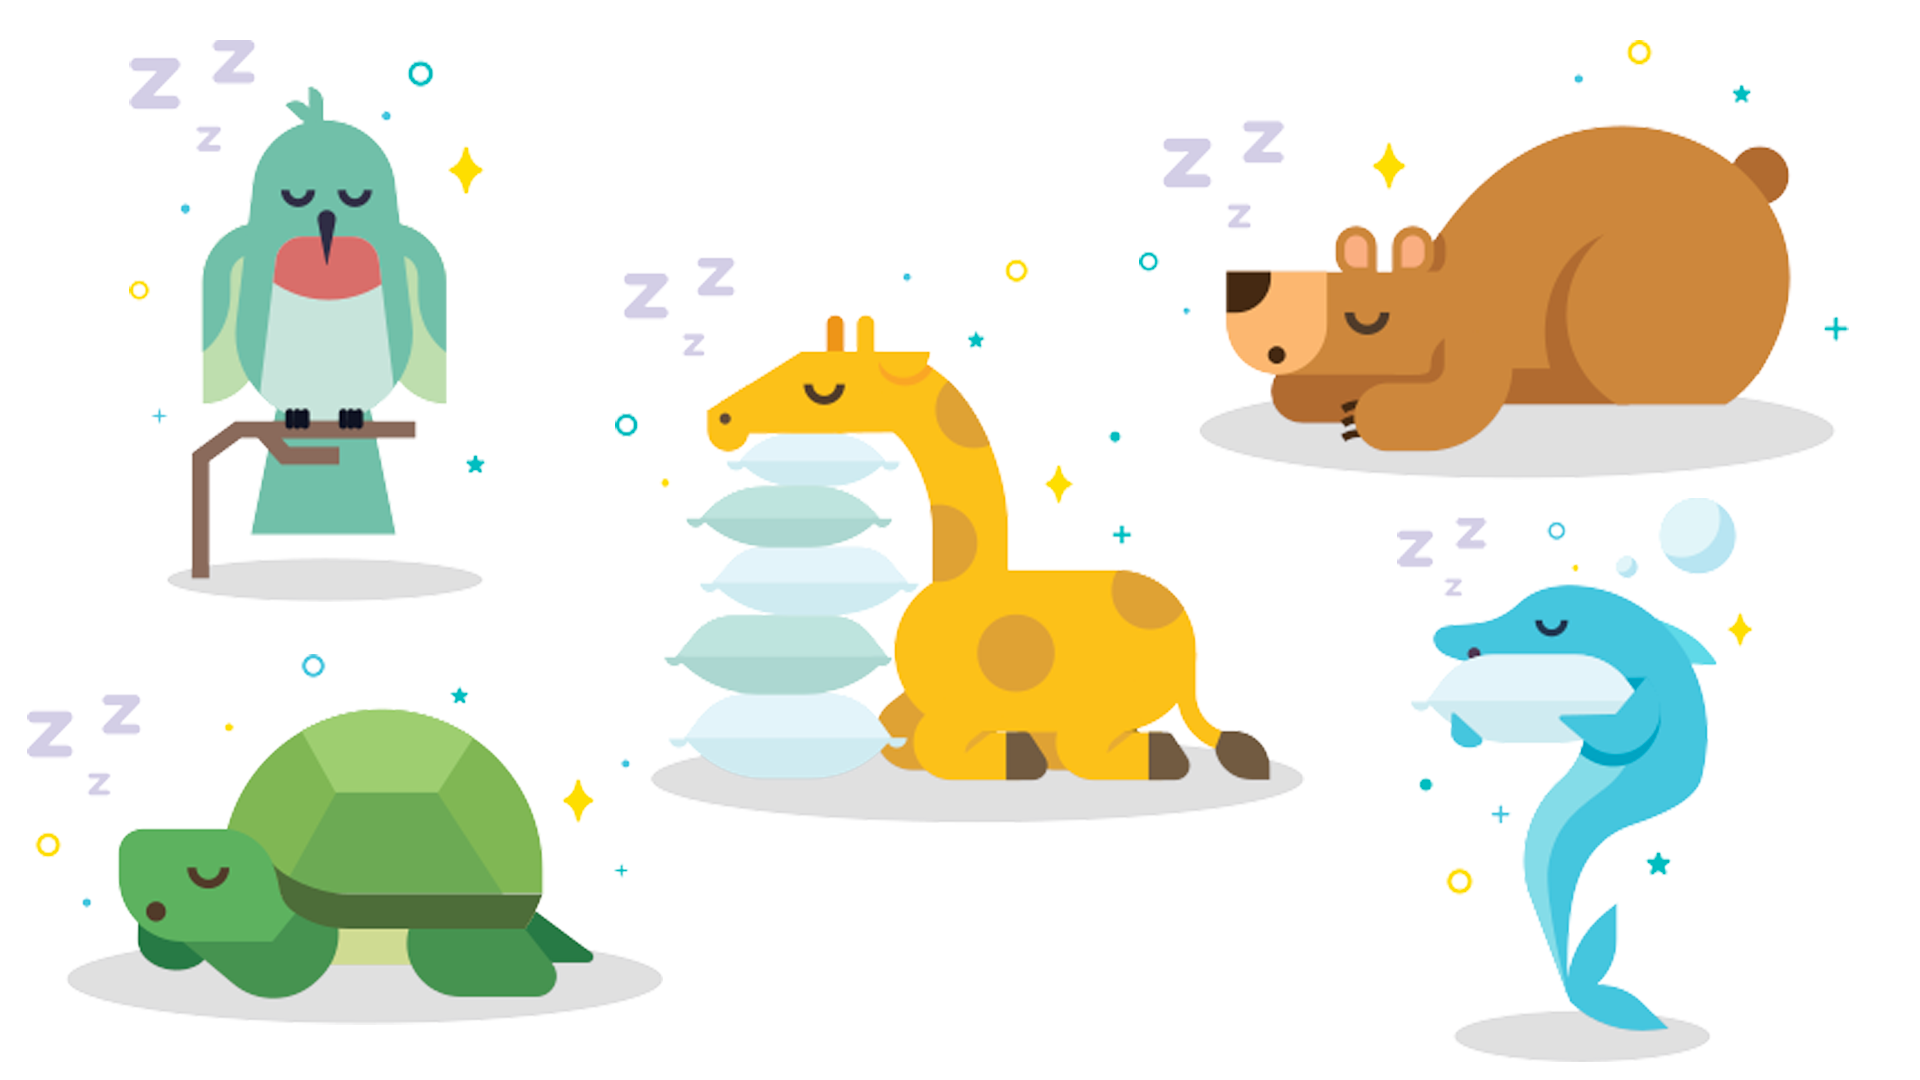 Icons used for Fitbit's &quot;Your Spirit Animal&quot; feature.